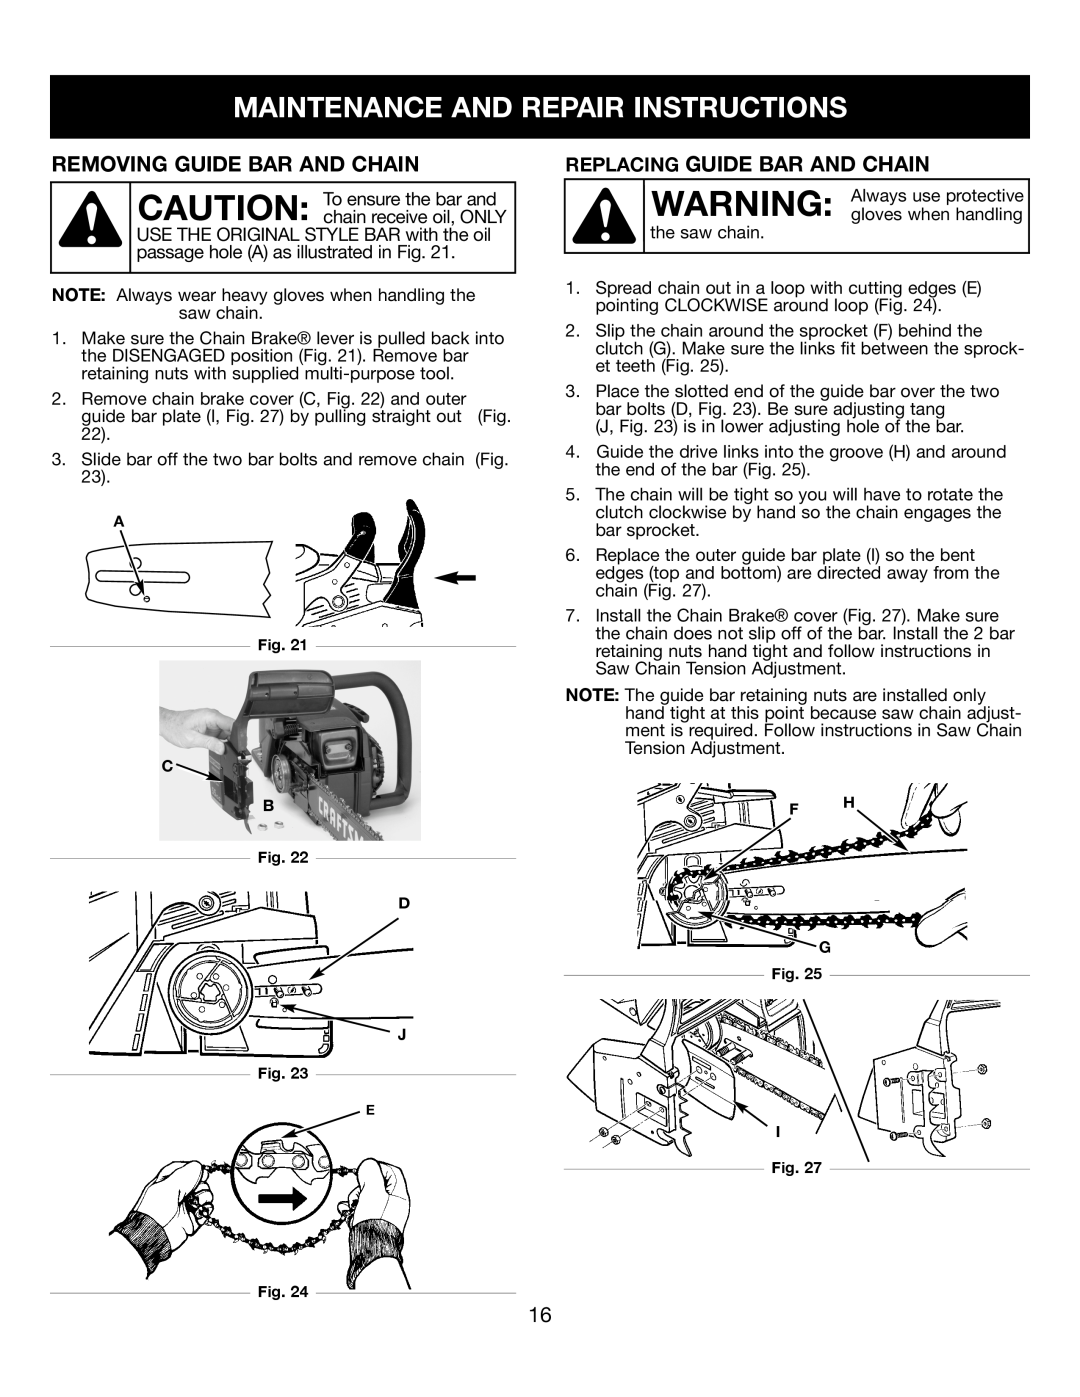 Craftsman 316350840 manual Maintenance And Repair Instructions, Removing Guide Bar And Chain, Replacing Guide Bar And Chain 